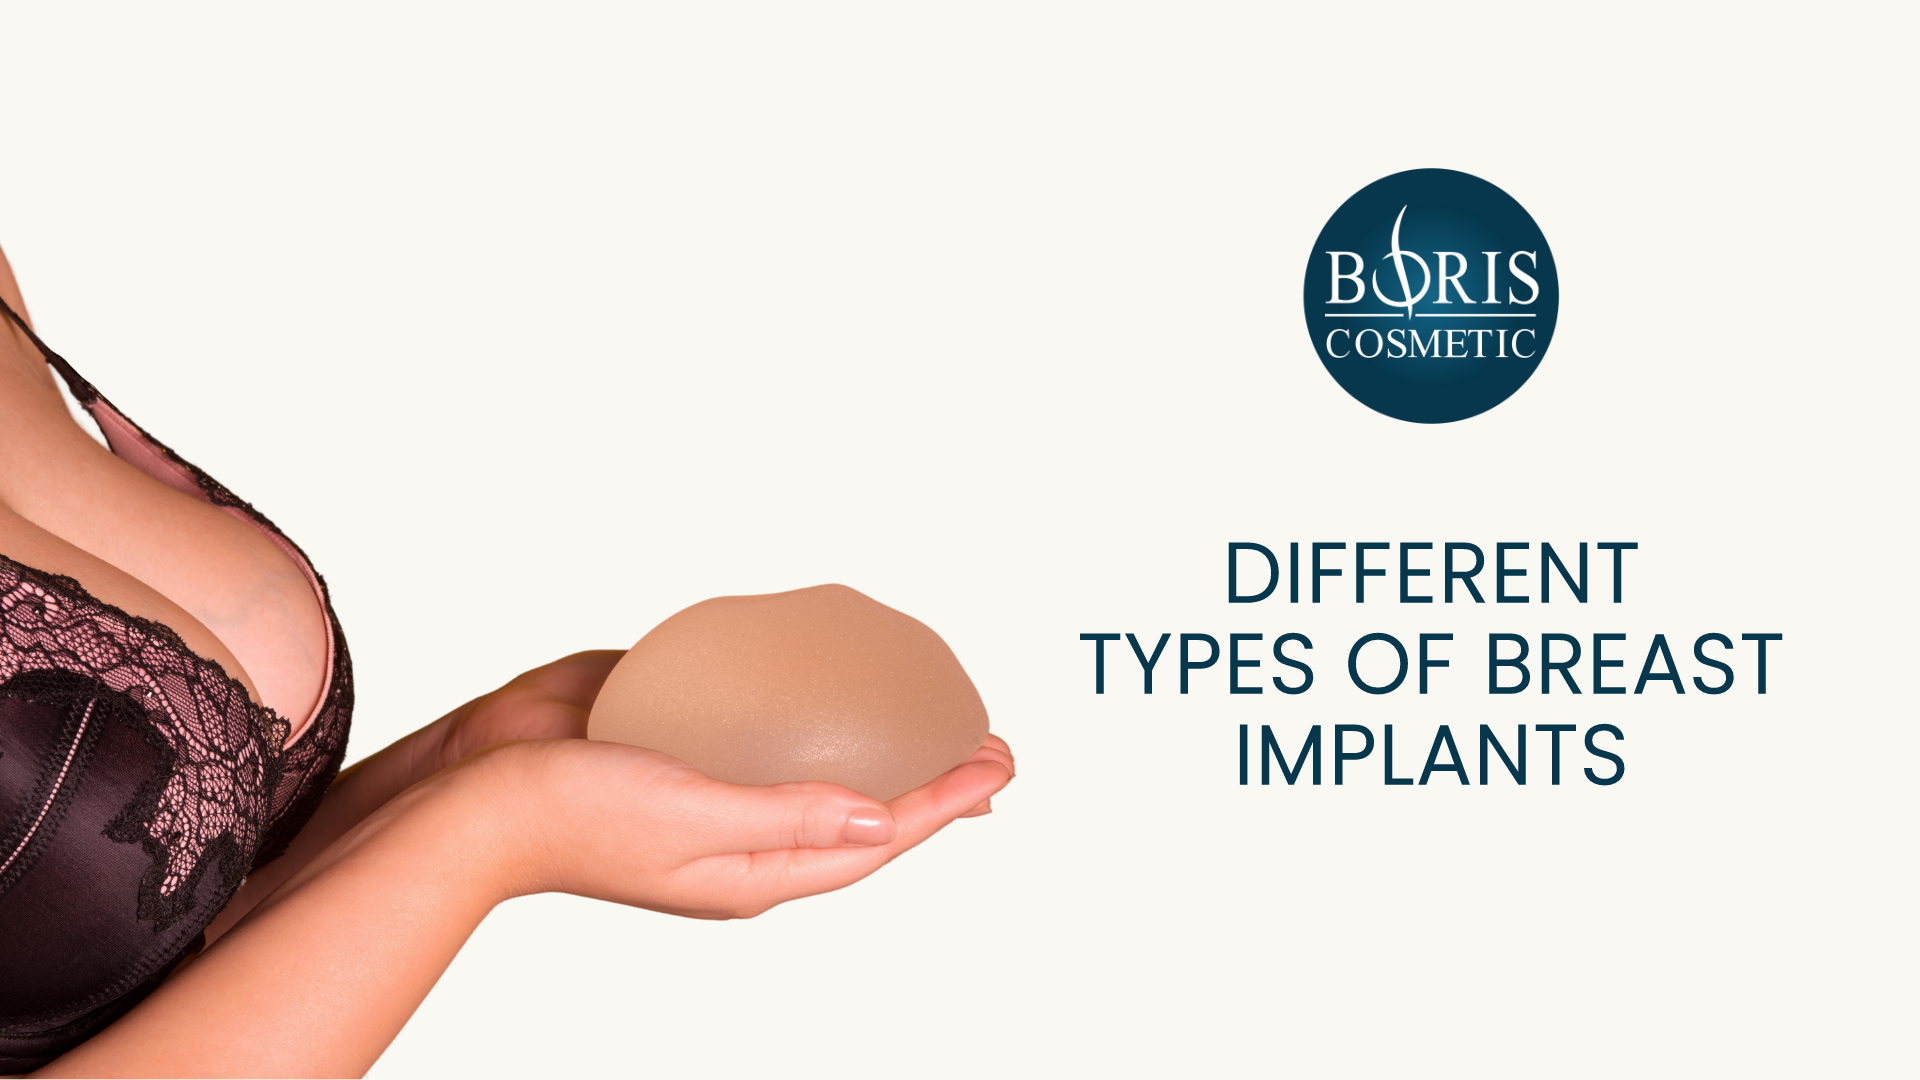 Saline vs. Silicone Implants: The Ultimate Differences